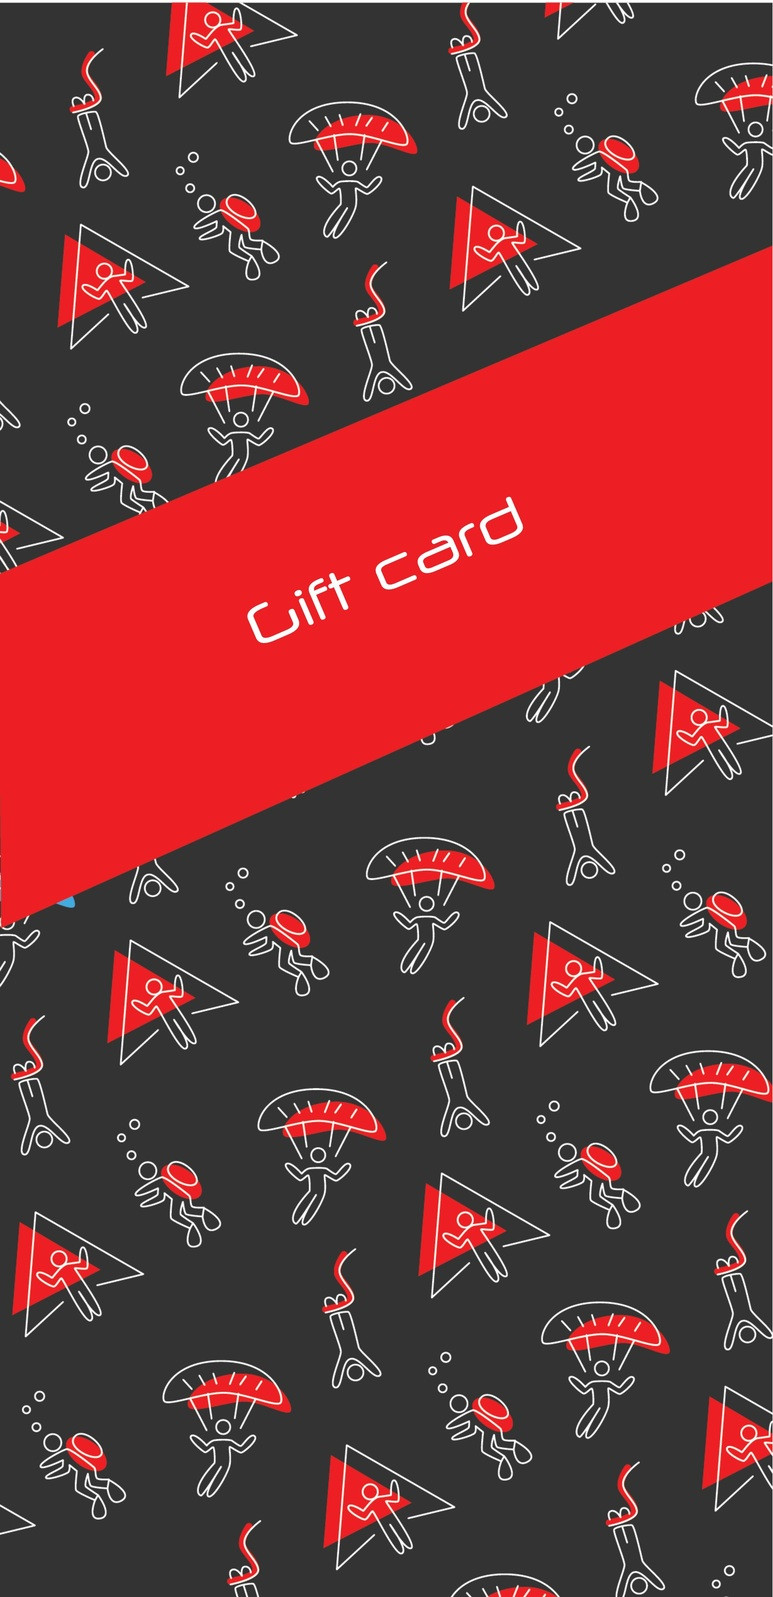 Gift vouchers and gift cards printing in Europe